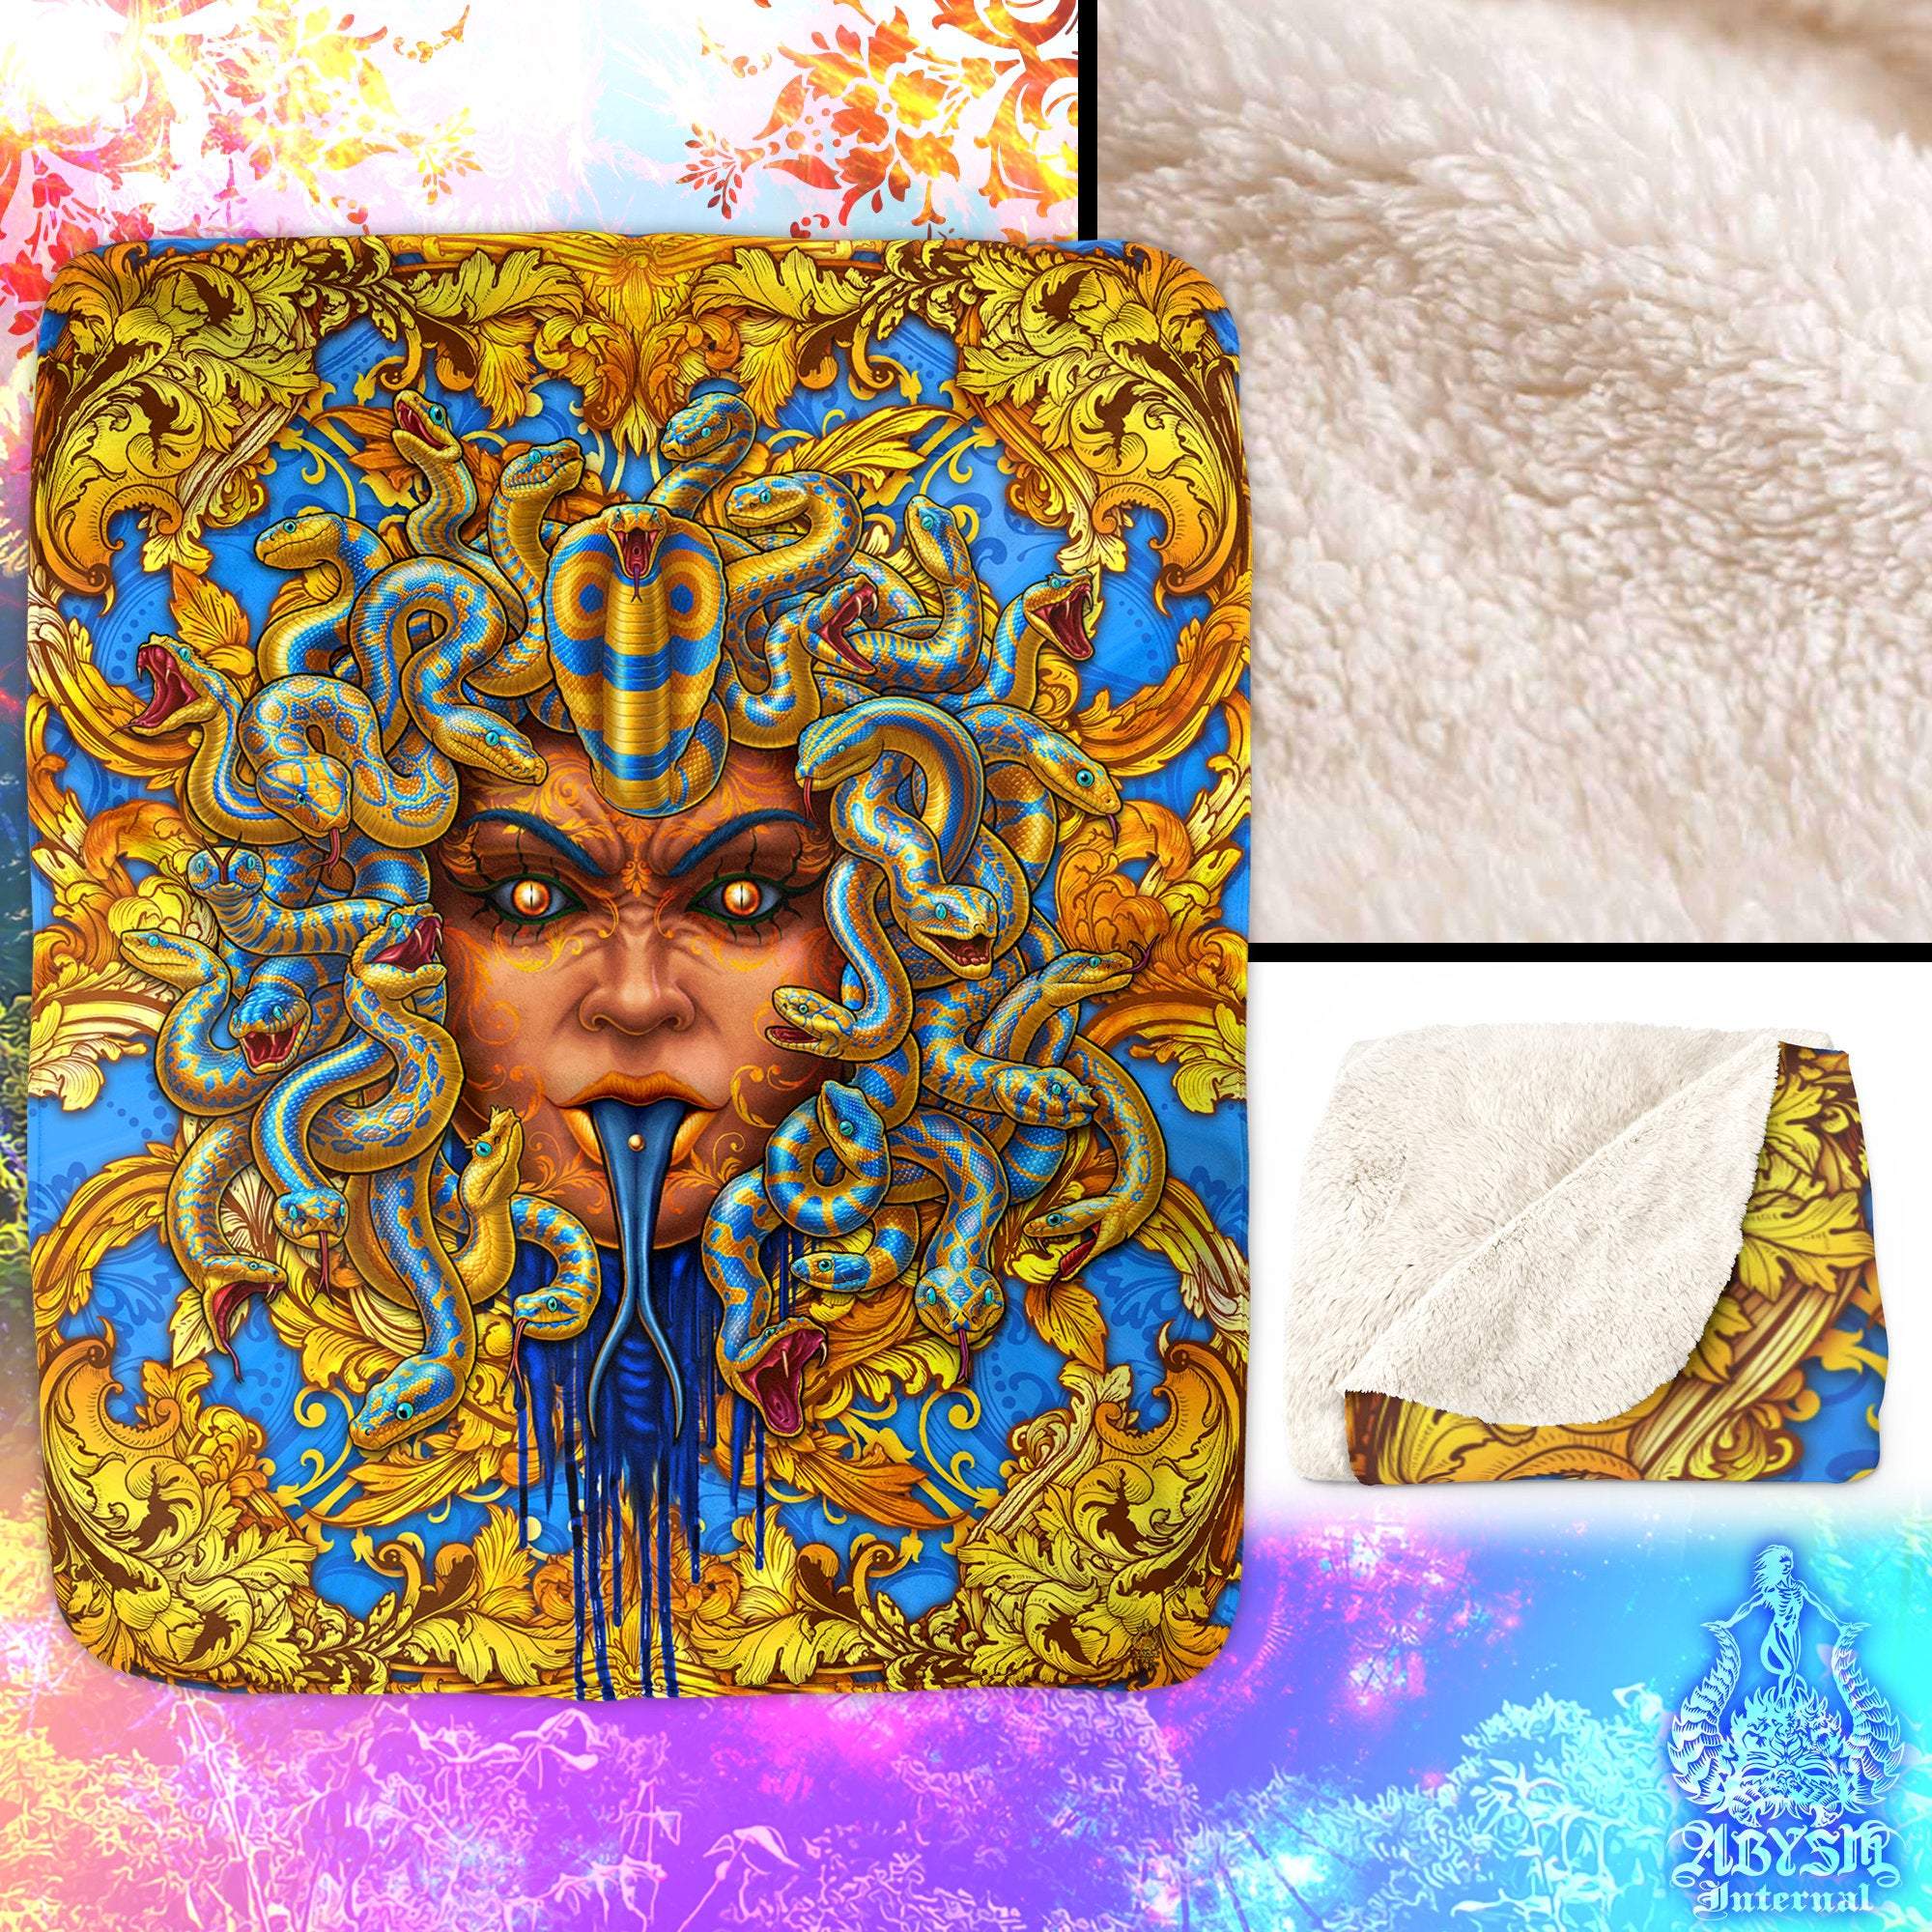 Medusa Throw Fleece Blanket, Eclectic Decor, Eclectic and Funky Gift - Cyan & Gold Snakes - Abysm Internal